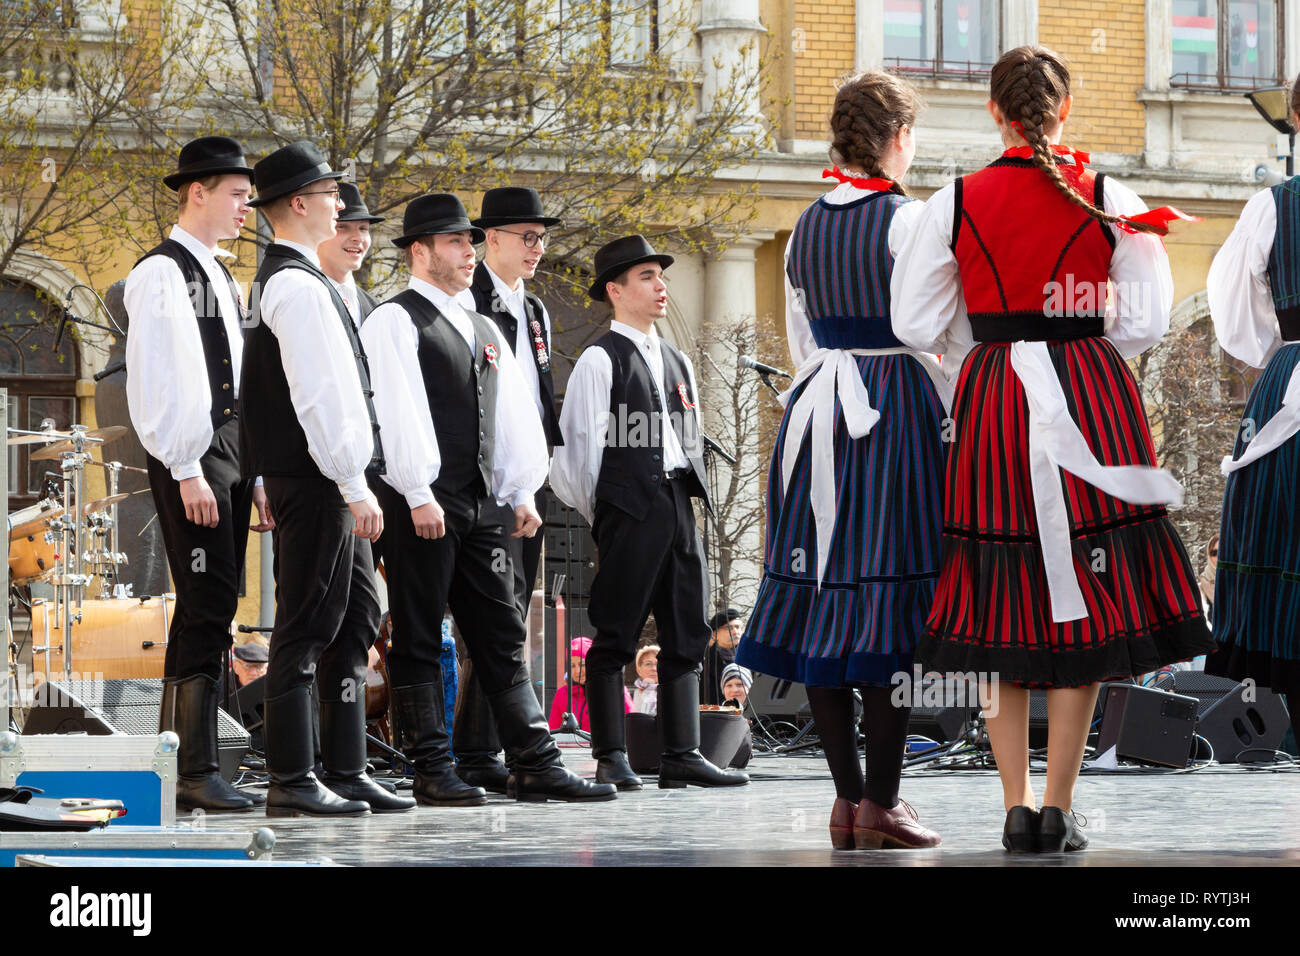 Sopron, Hungary. 15th Mar, 2019. A group of folk dancer lads stand and sing on stage at Petőfi Square, Sopron, Hungary. Girls in traditional costume stand on the right. Credit: Wahavi/Alamy Live News Stock Photo